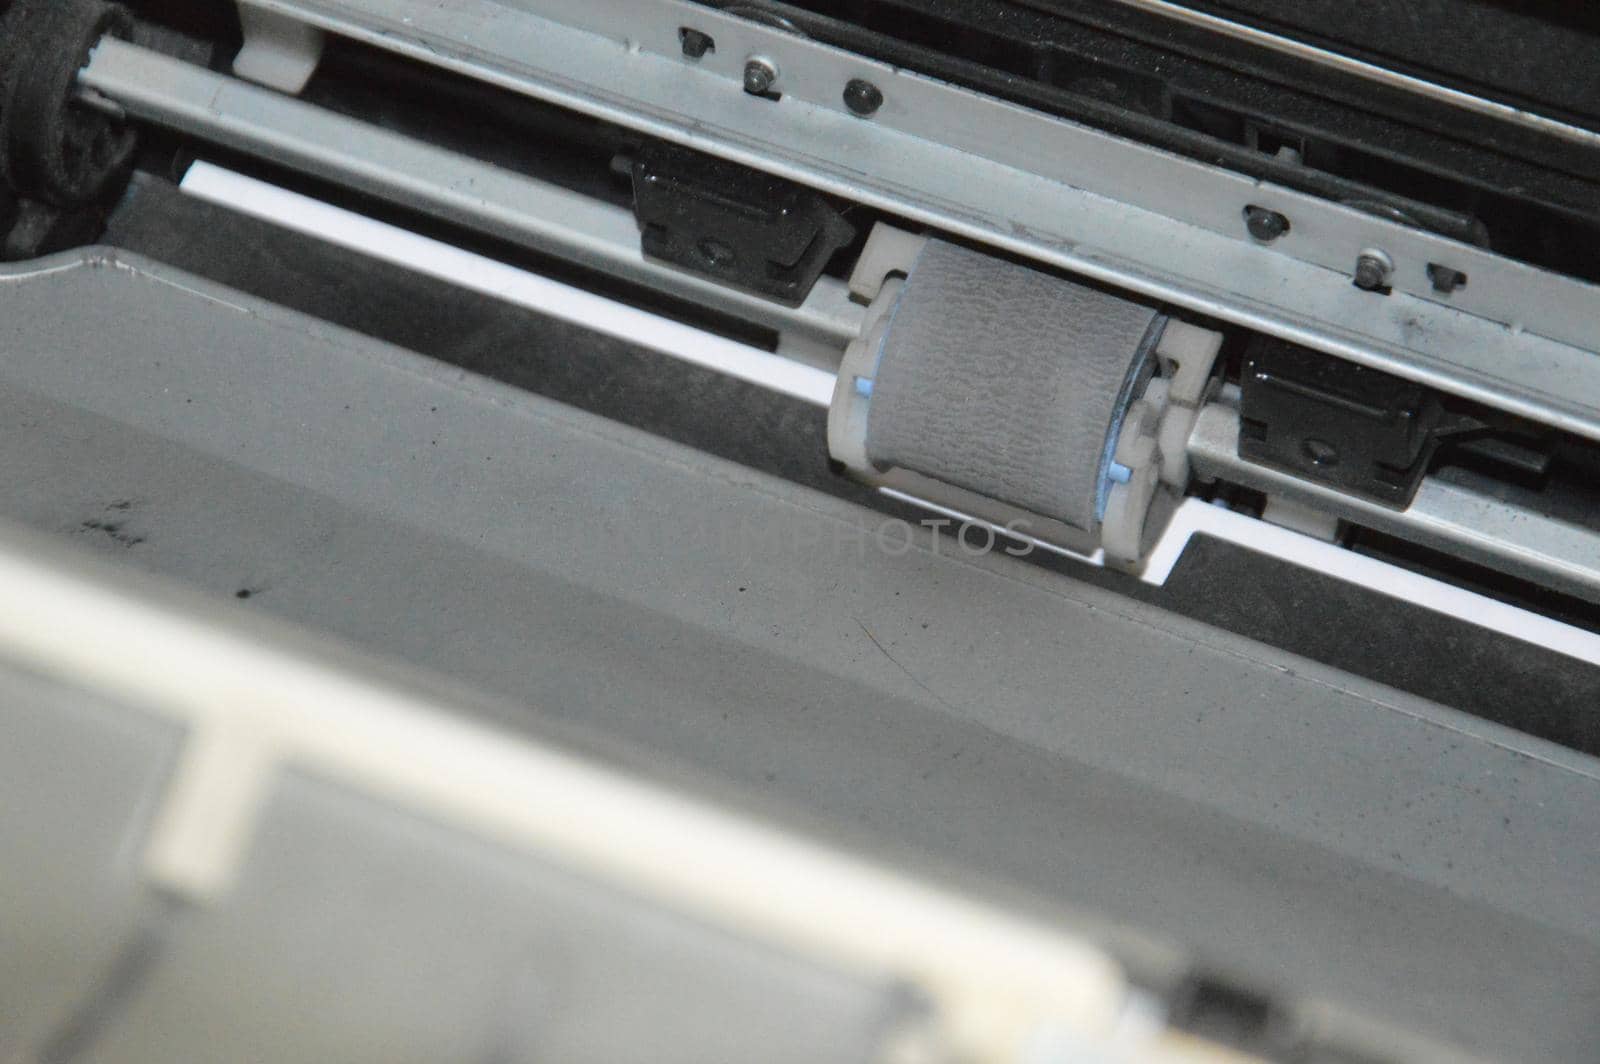 Charging the laser printer cartridge with toner powder by architectphd